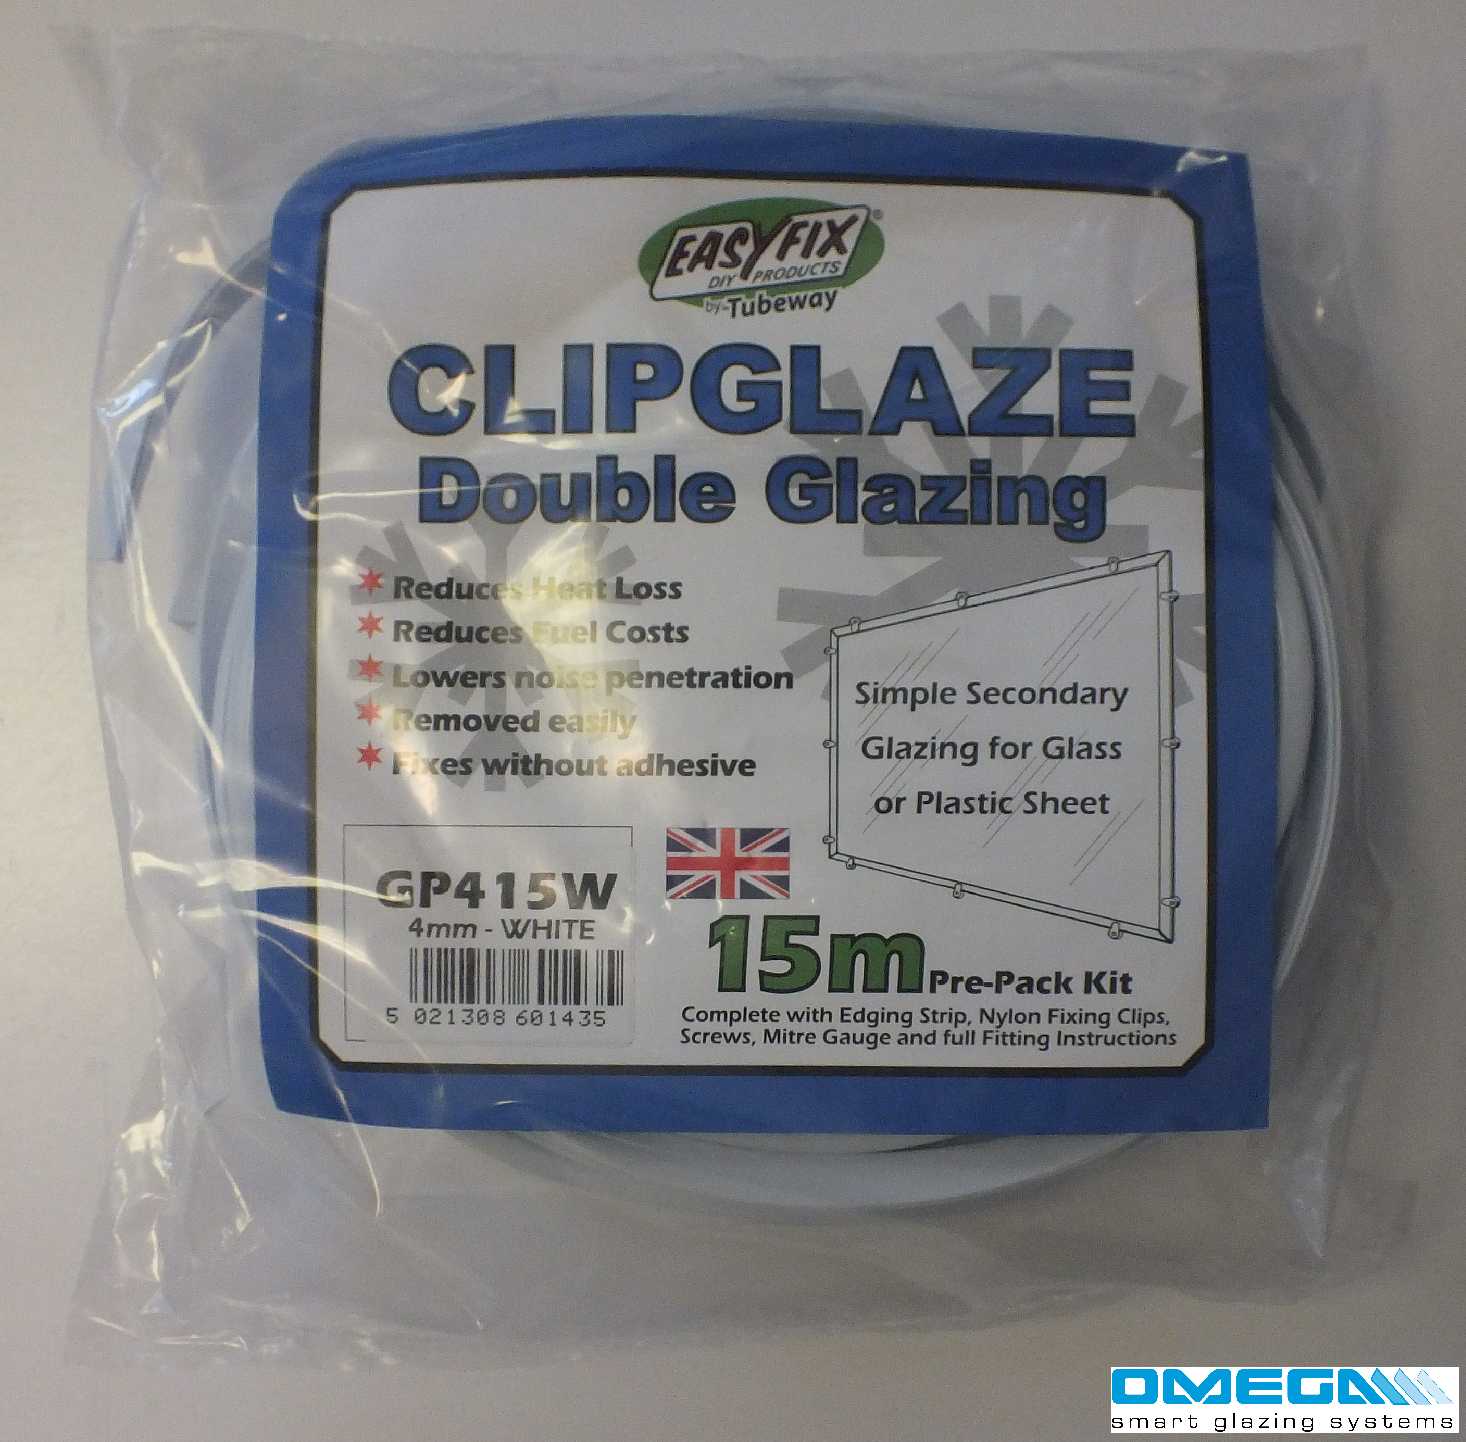 Great deals on Easyfix Clipglaze Edging Kit - 15m roll of edging for 2mm Glazing Thickness, White, Clear or Brown